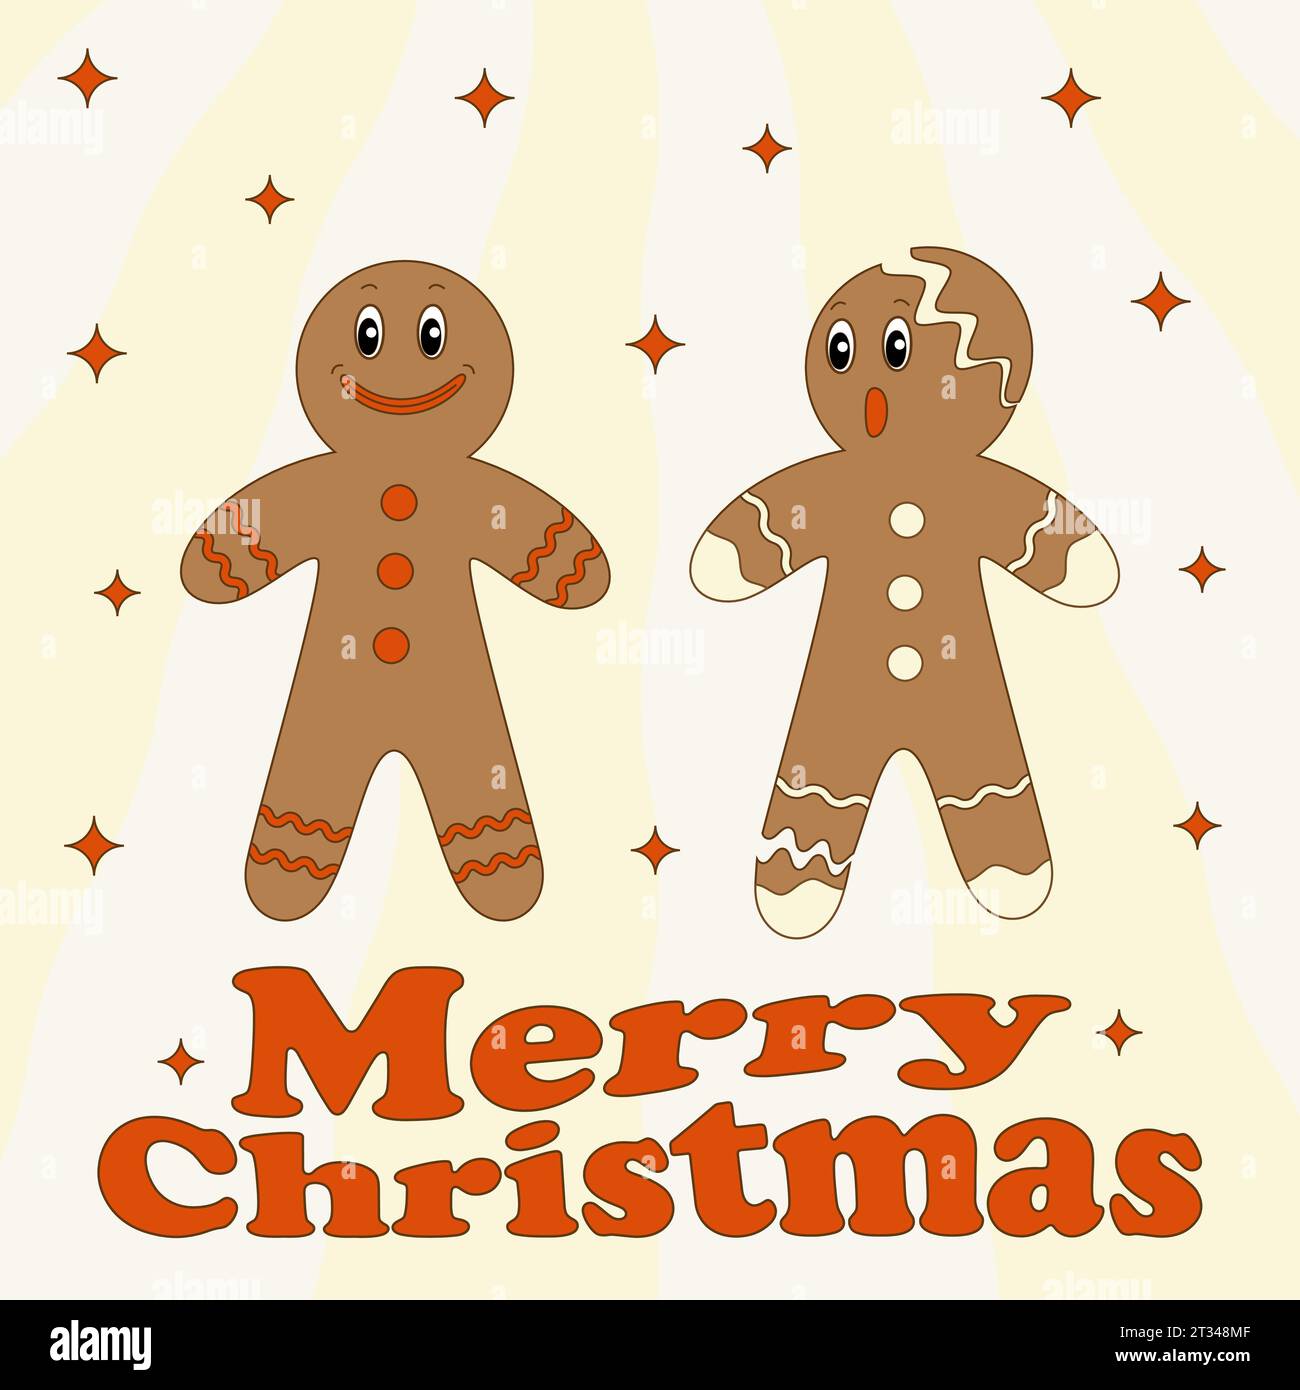 Two gingerbread men in cartoon style. Vector Christmas illustration. Stock Vector